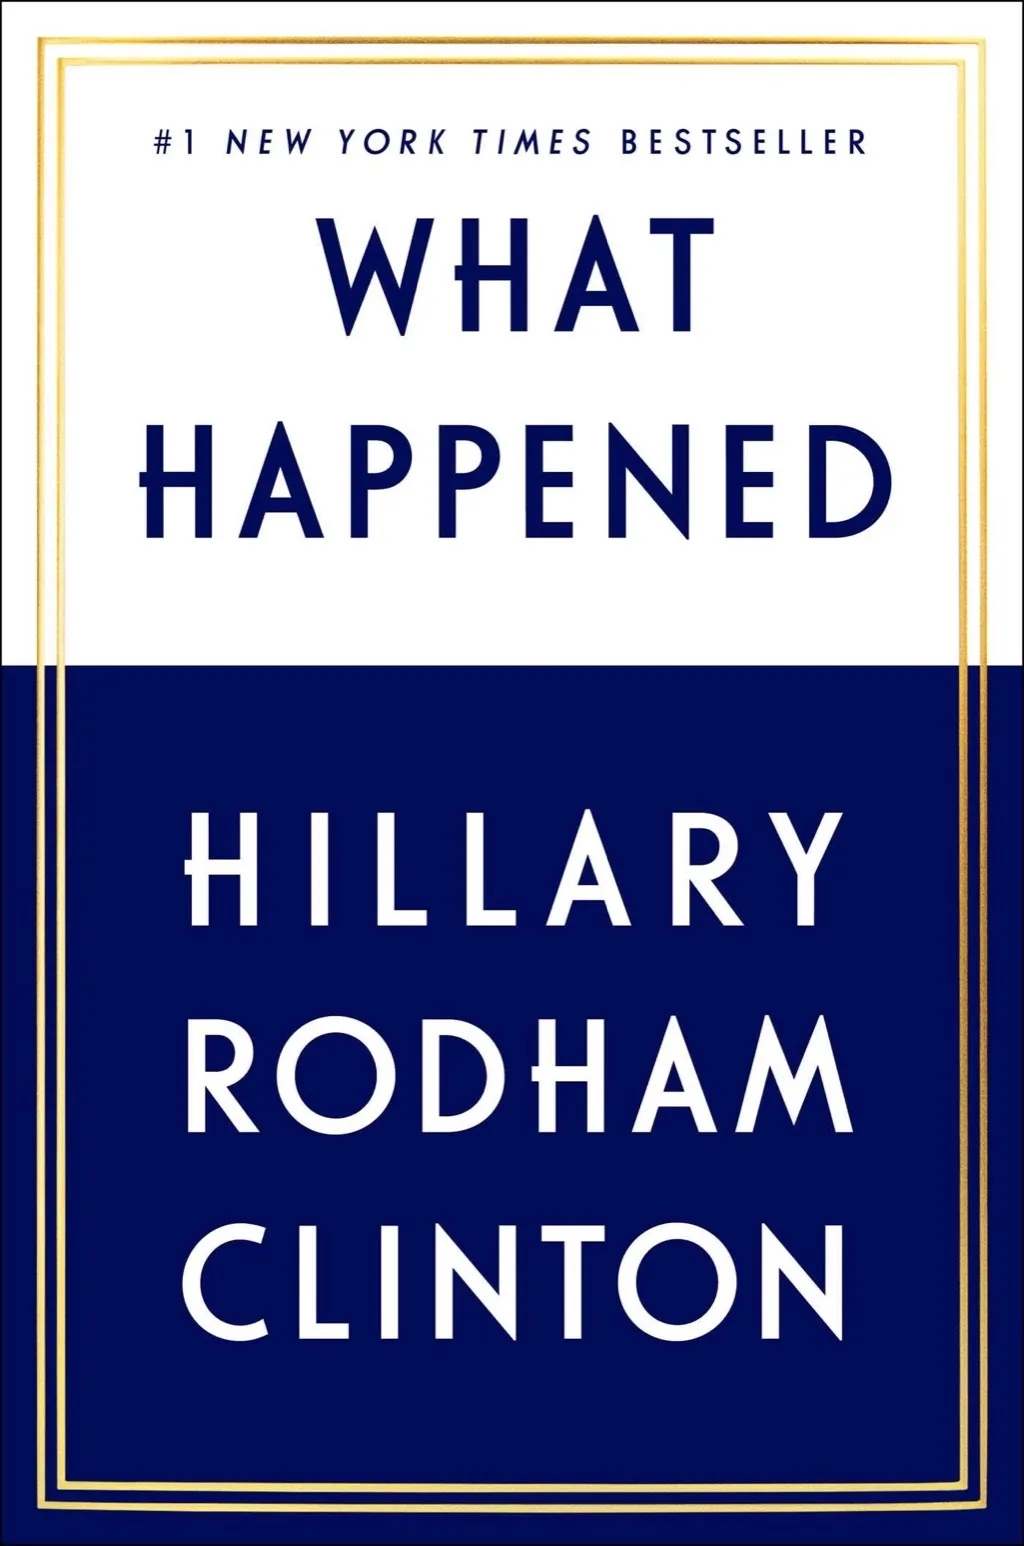 What Happened by Hillary Clinton, books every woman should read in her 40s